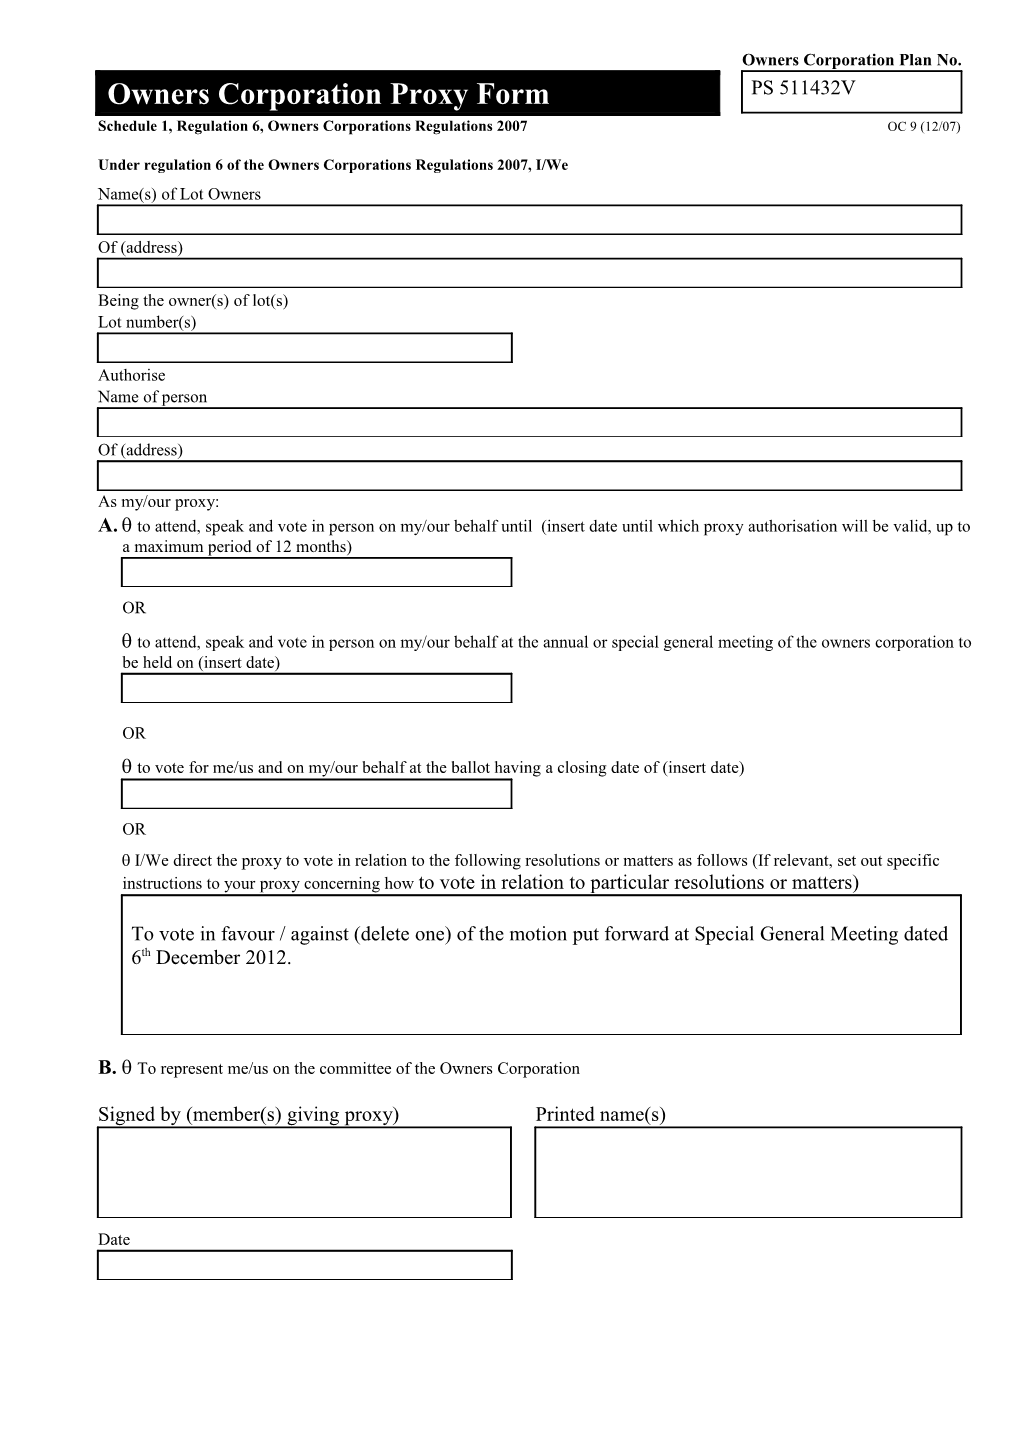 Owners Corporation Proxy Form